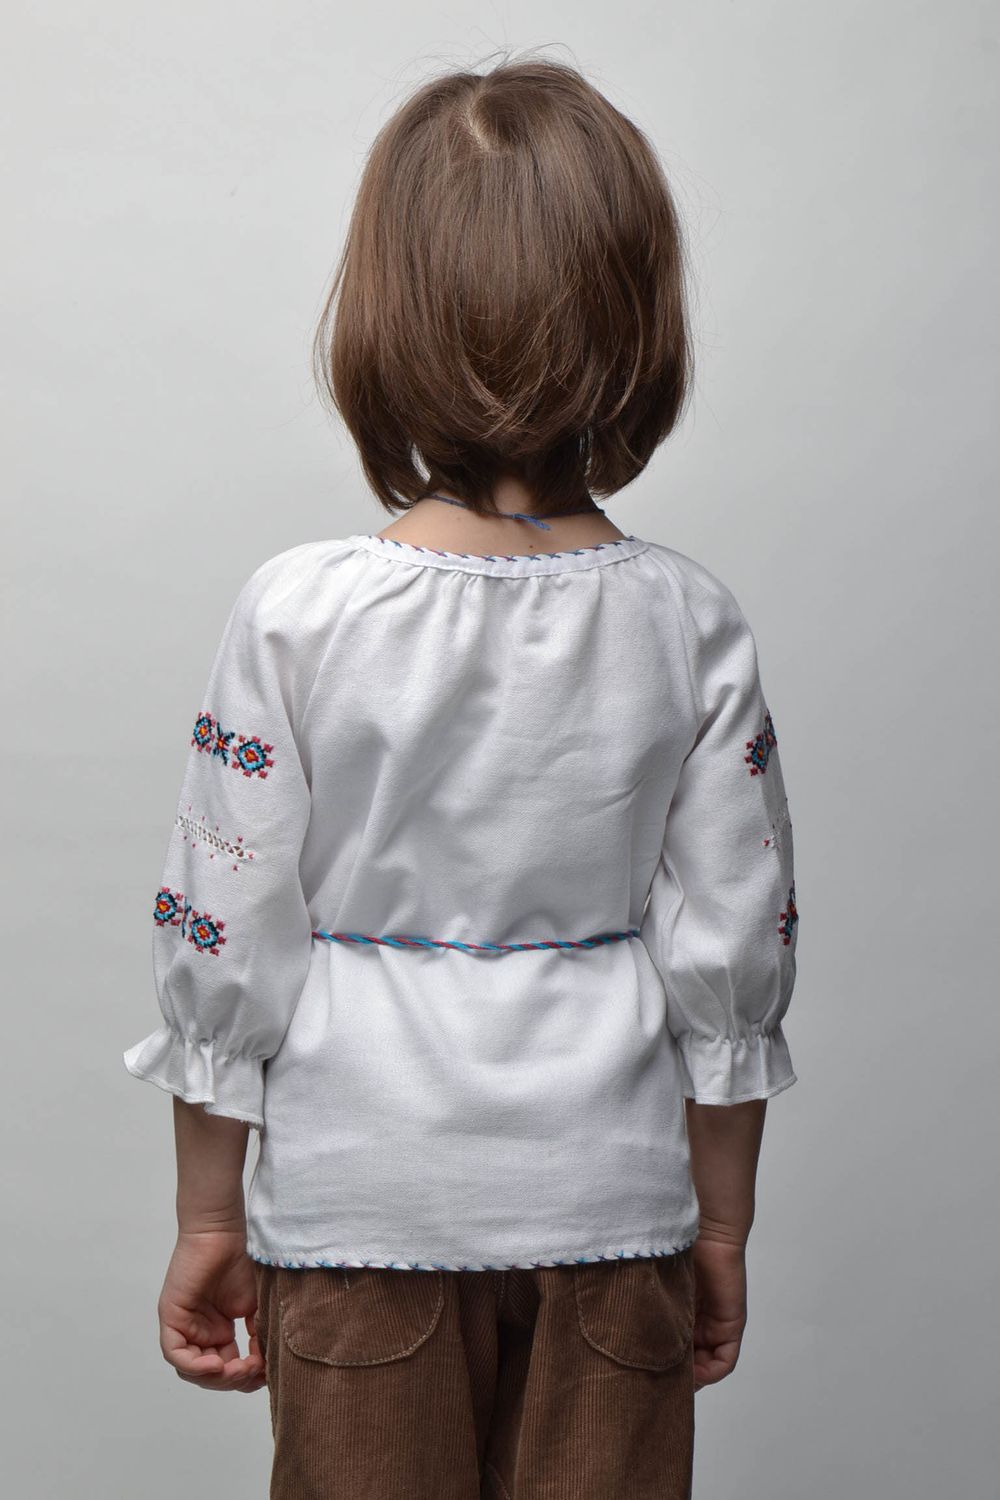 Embroidered shirt with floral motives for 5-7 years old girl photo 4